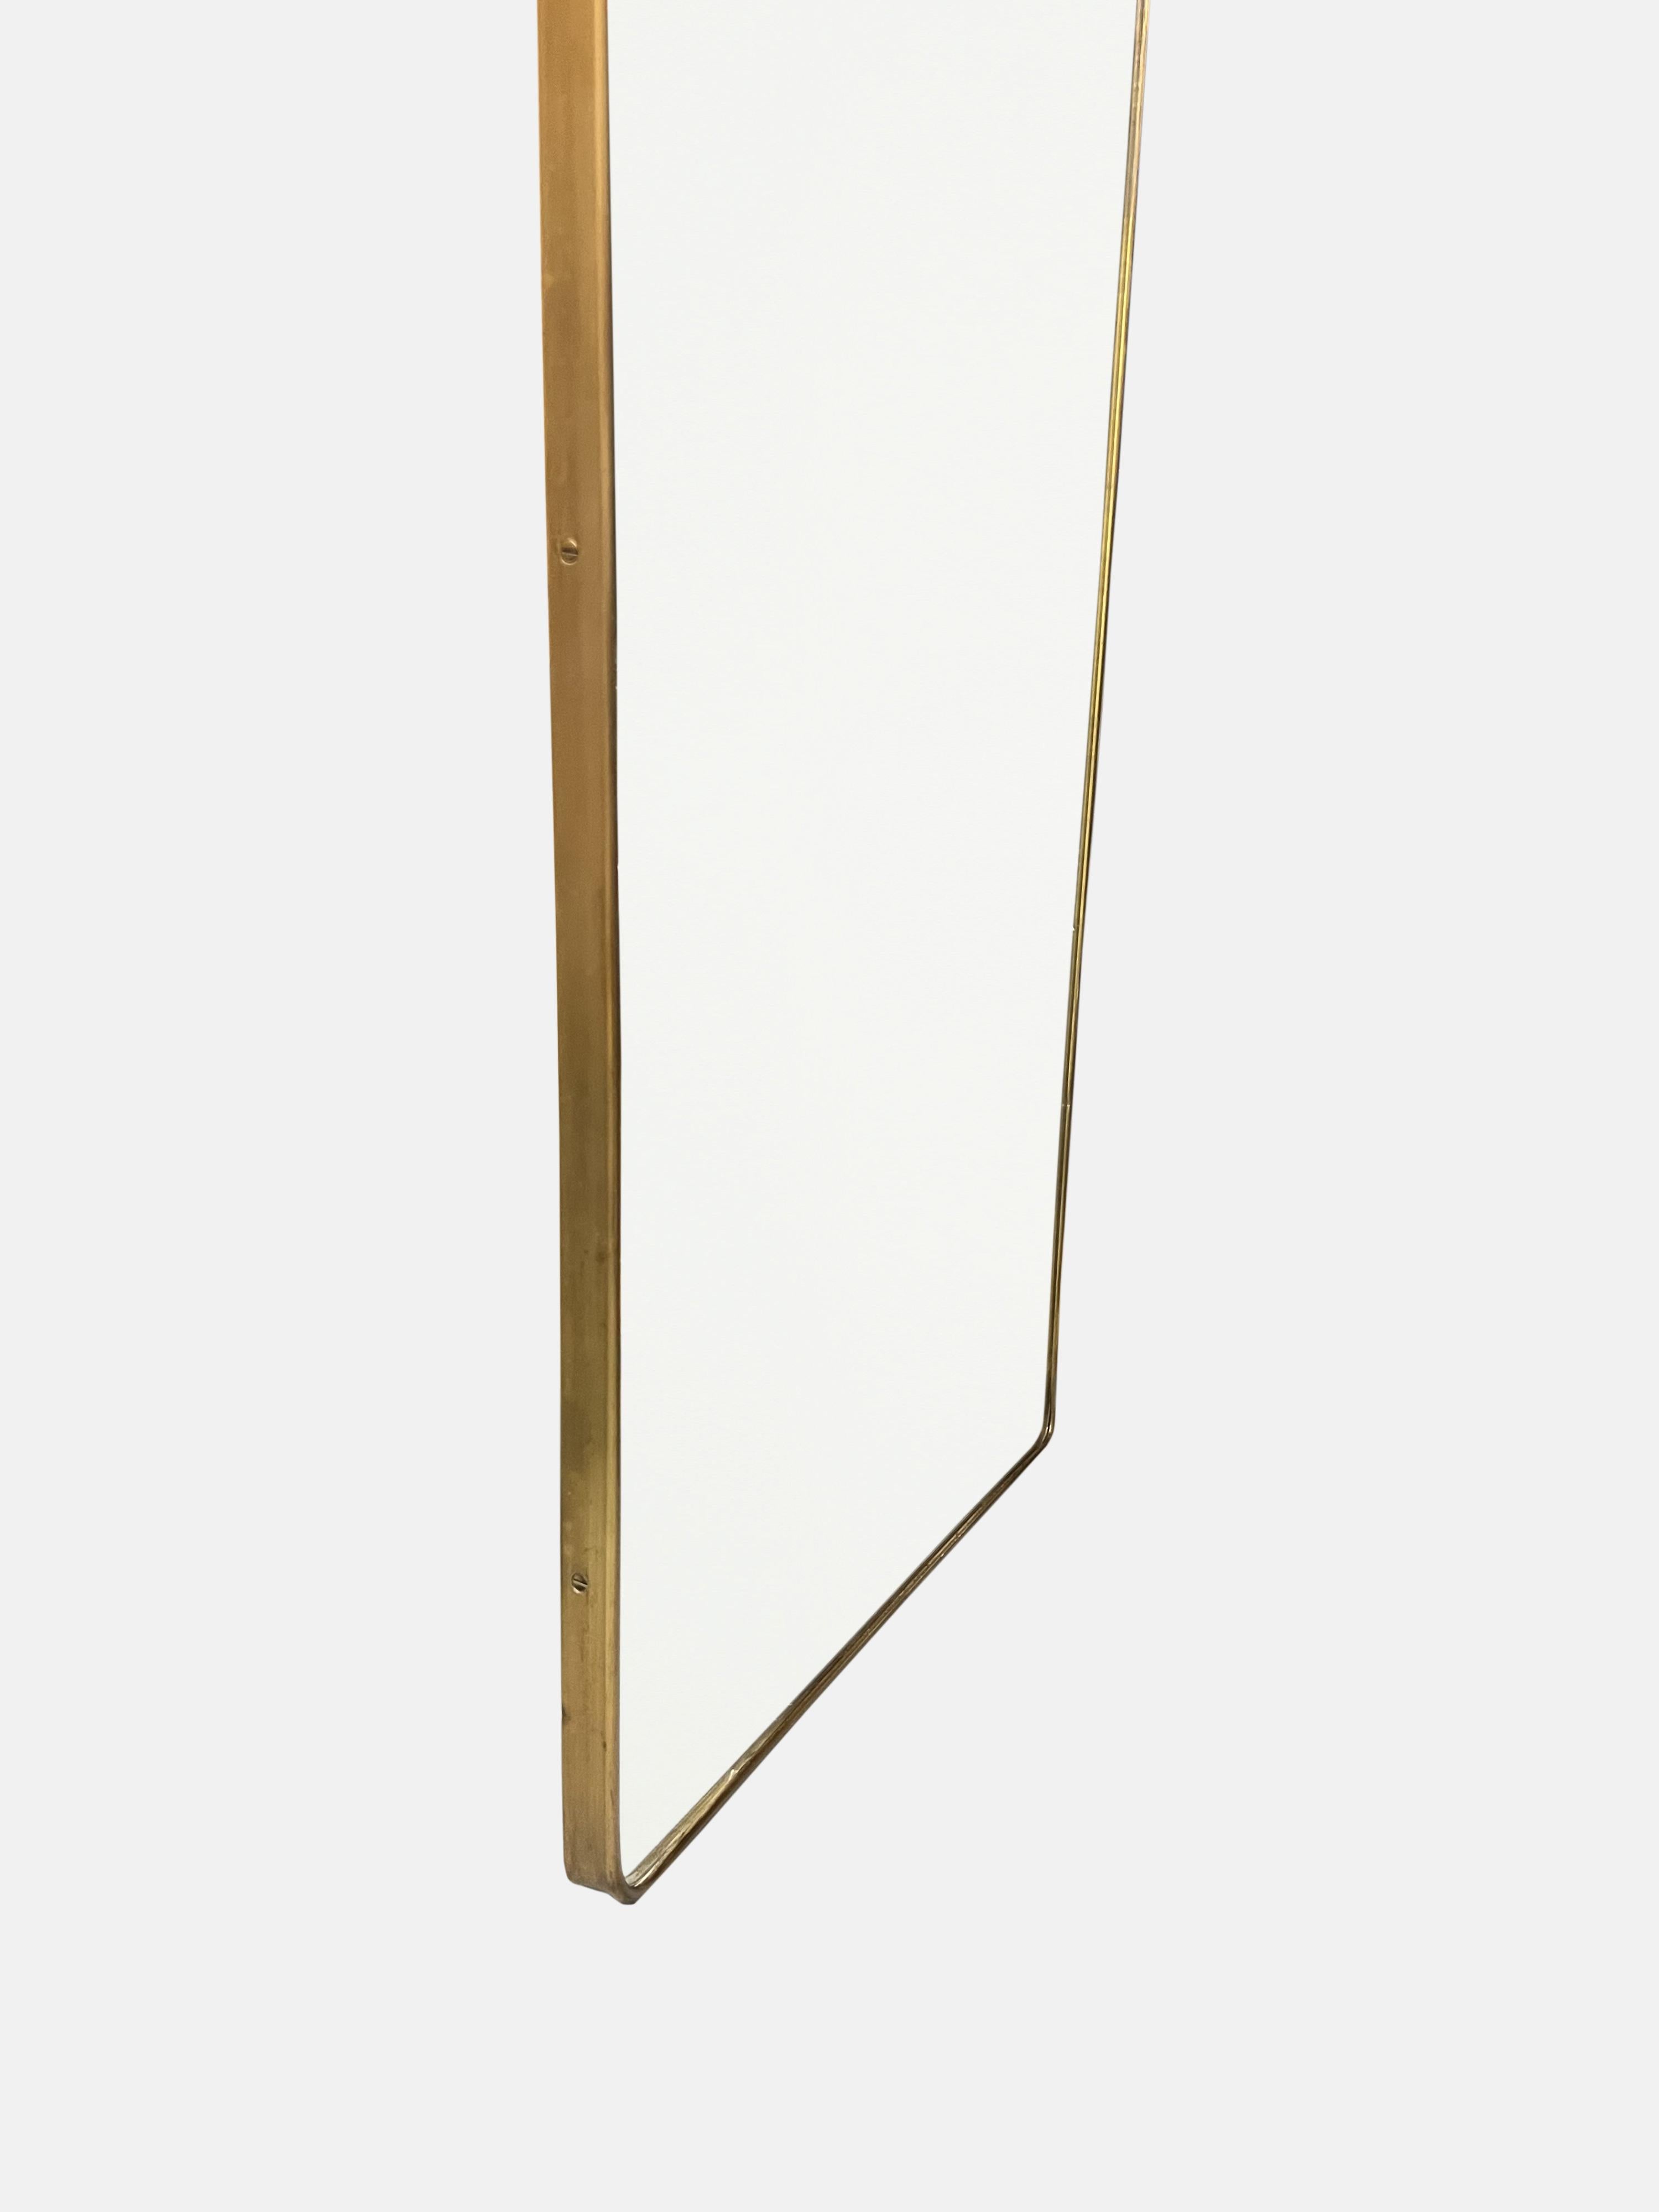 1950s Italian Modernist Pair of Grand Scale Brass Wall Mirrors For Sale 3